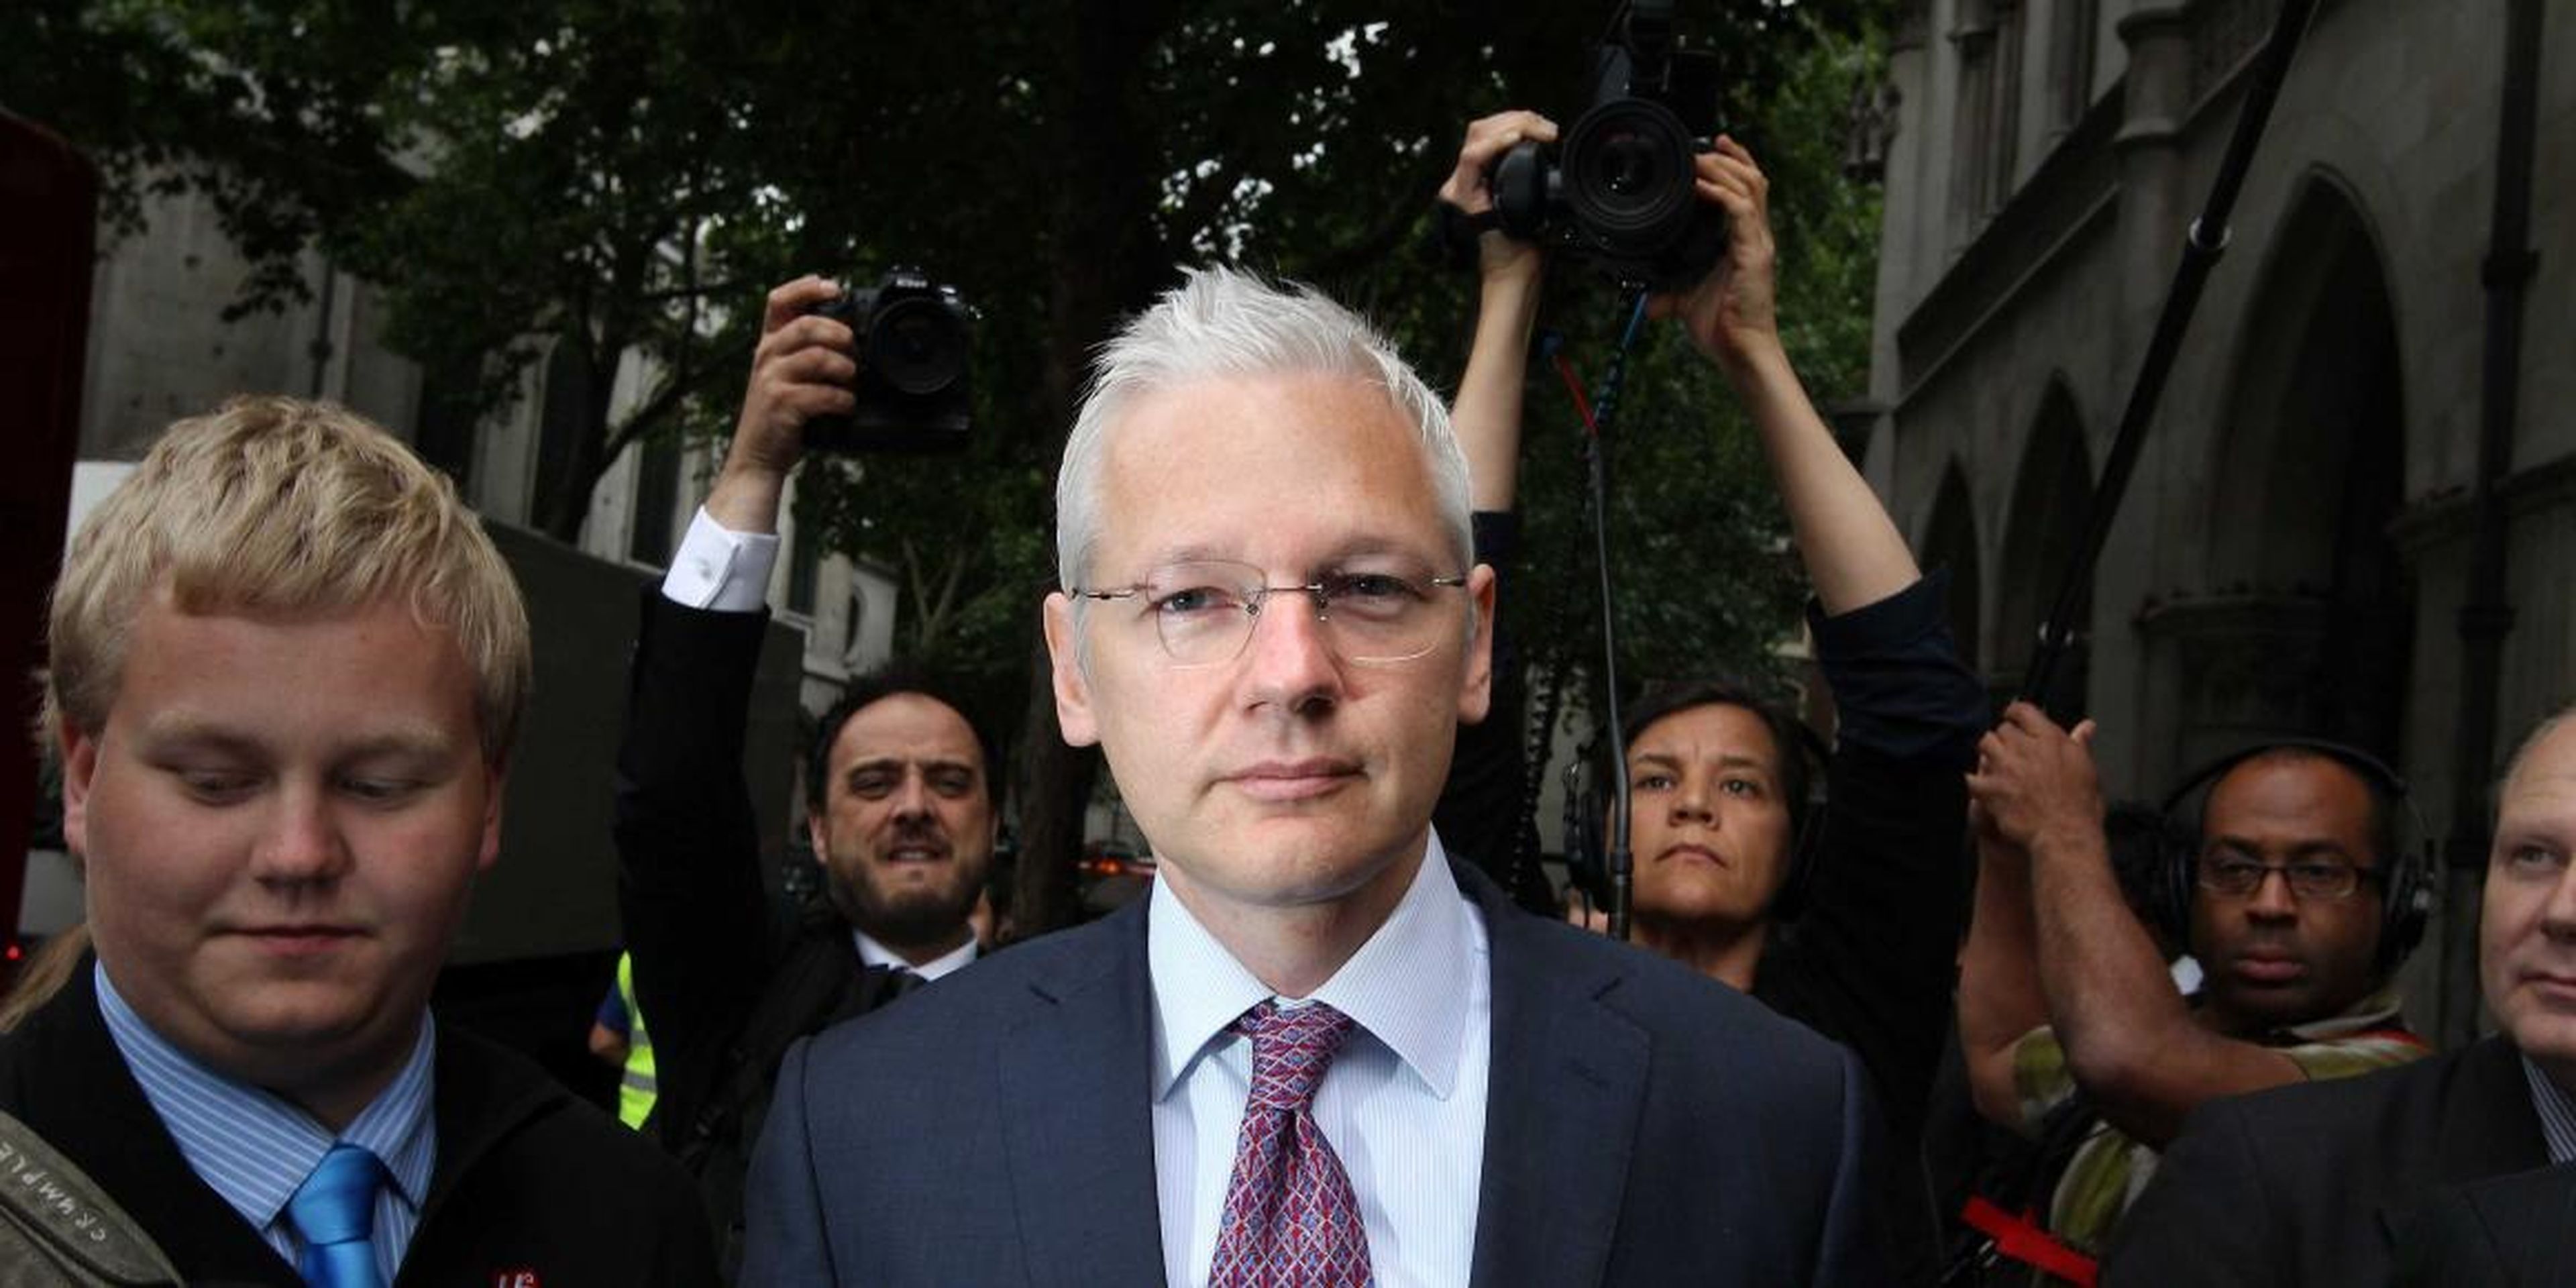 Ecuadorian officials deny WikiLeaks' claim that Julian Assange is about to be kicked out its embassy in London